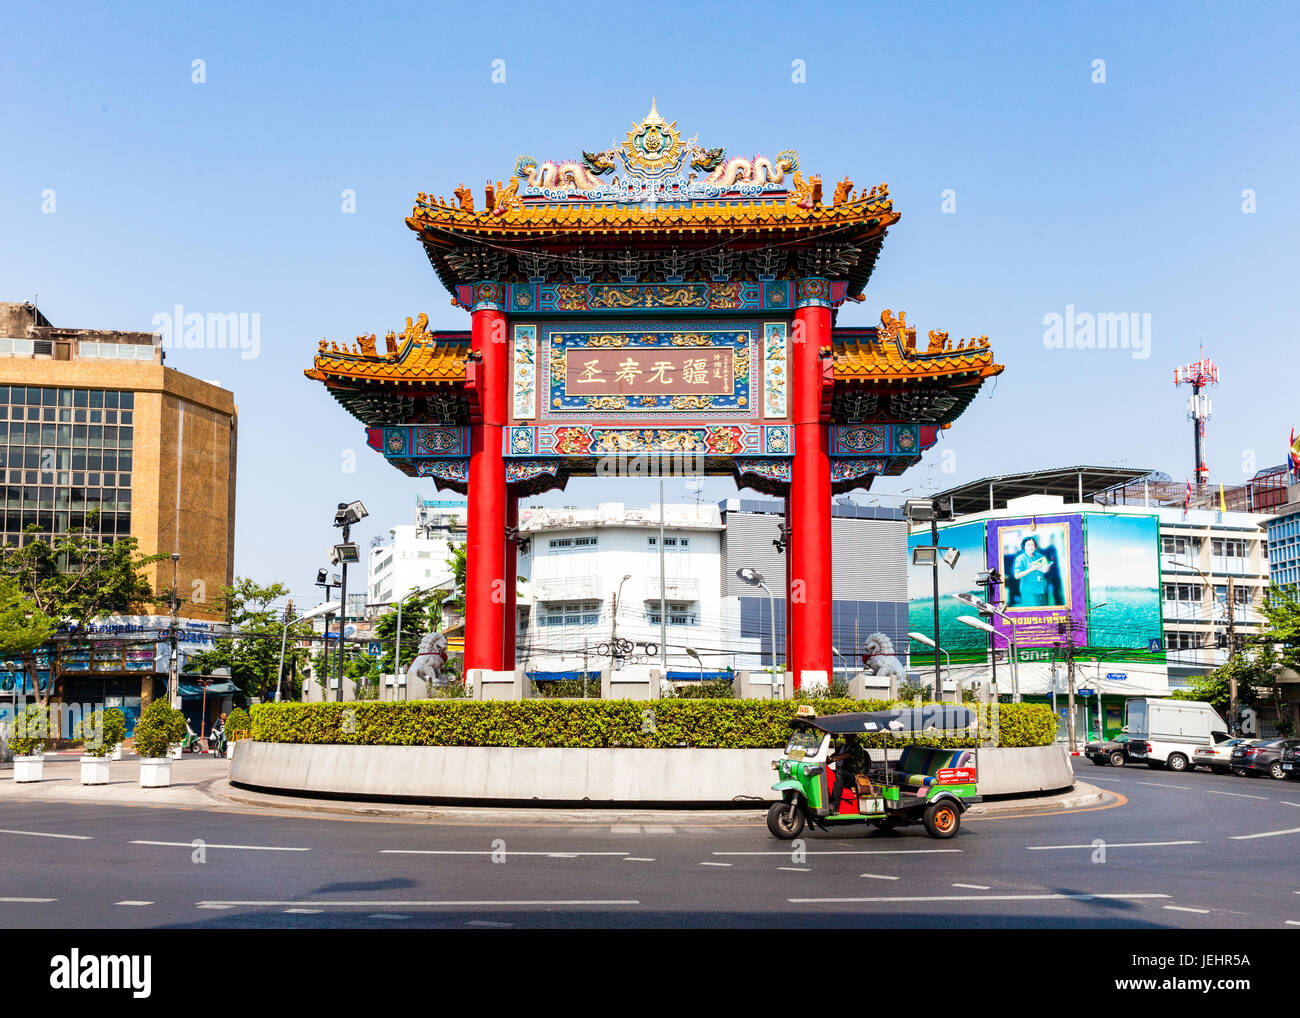 BANGKOK, THAILAND - APRIL 24: Traditional Thai taxi with Chinatown Gate on background on April 24, 2016 in Bangkok, Thailand. Stock Photo